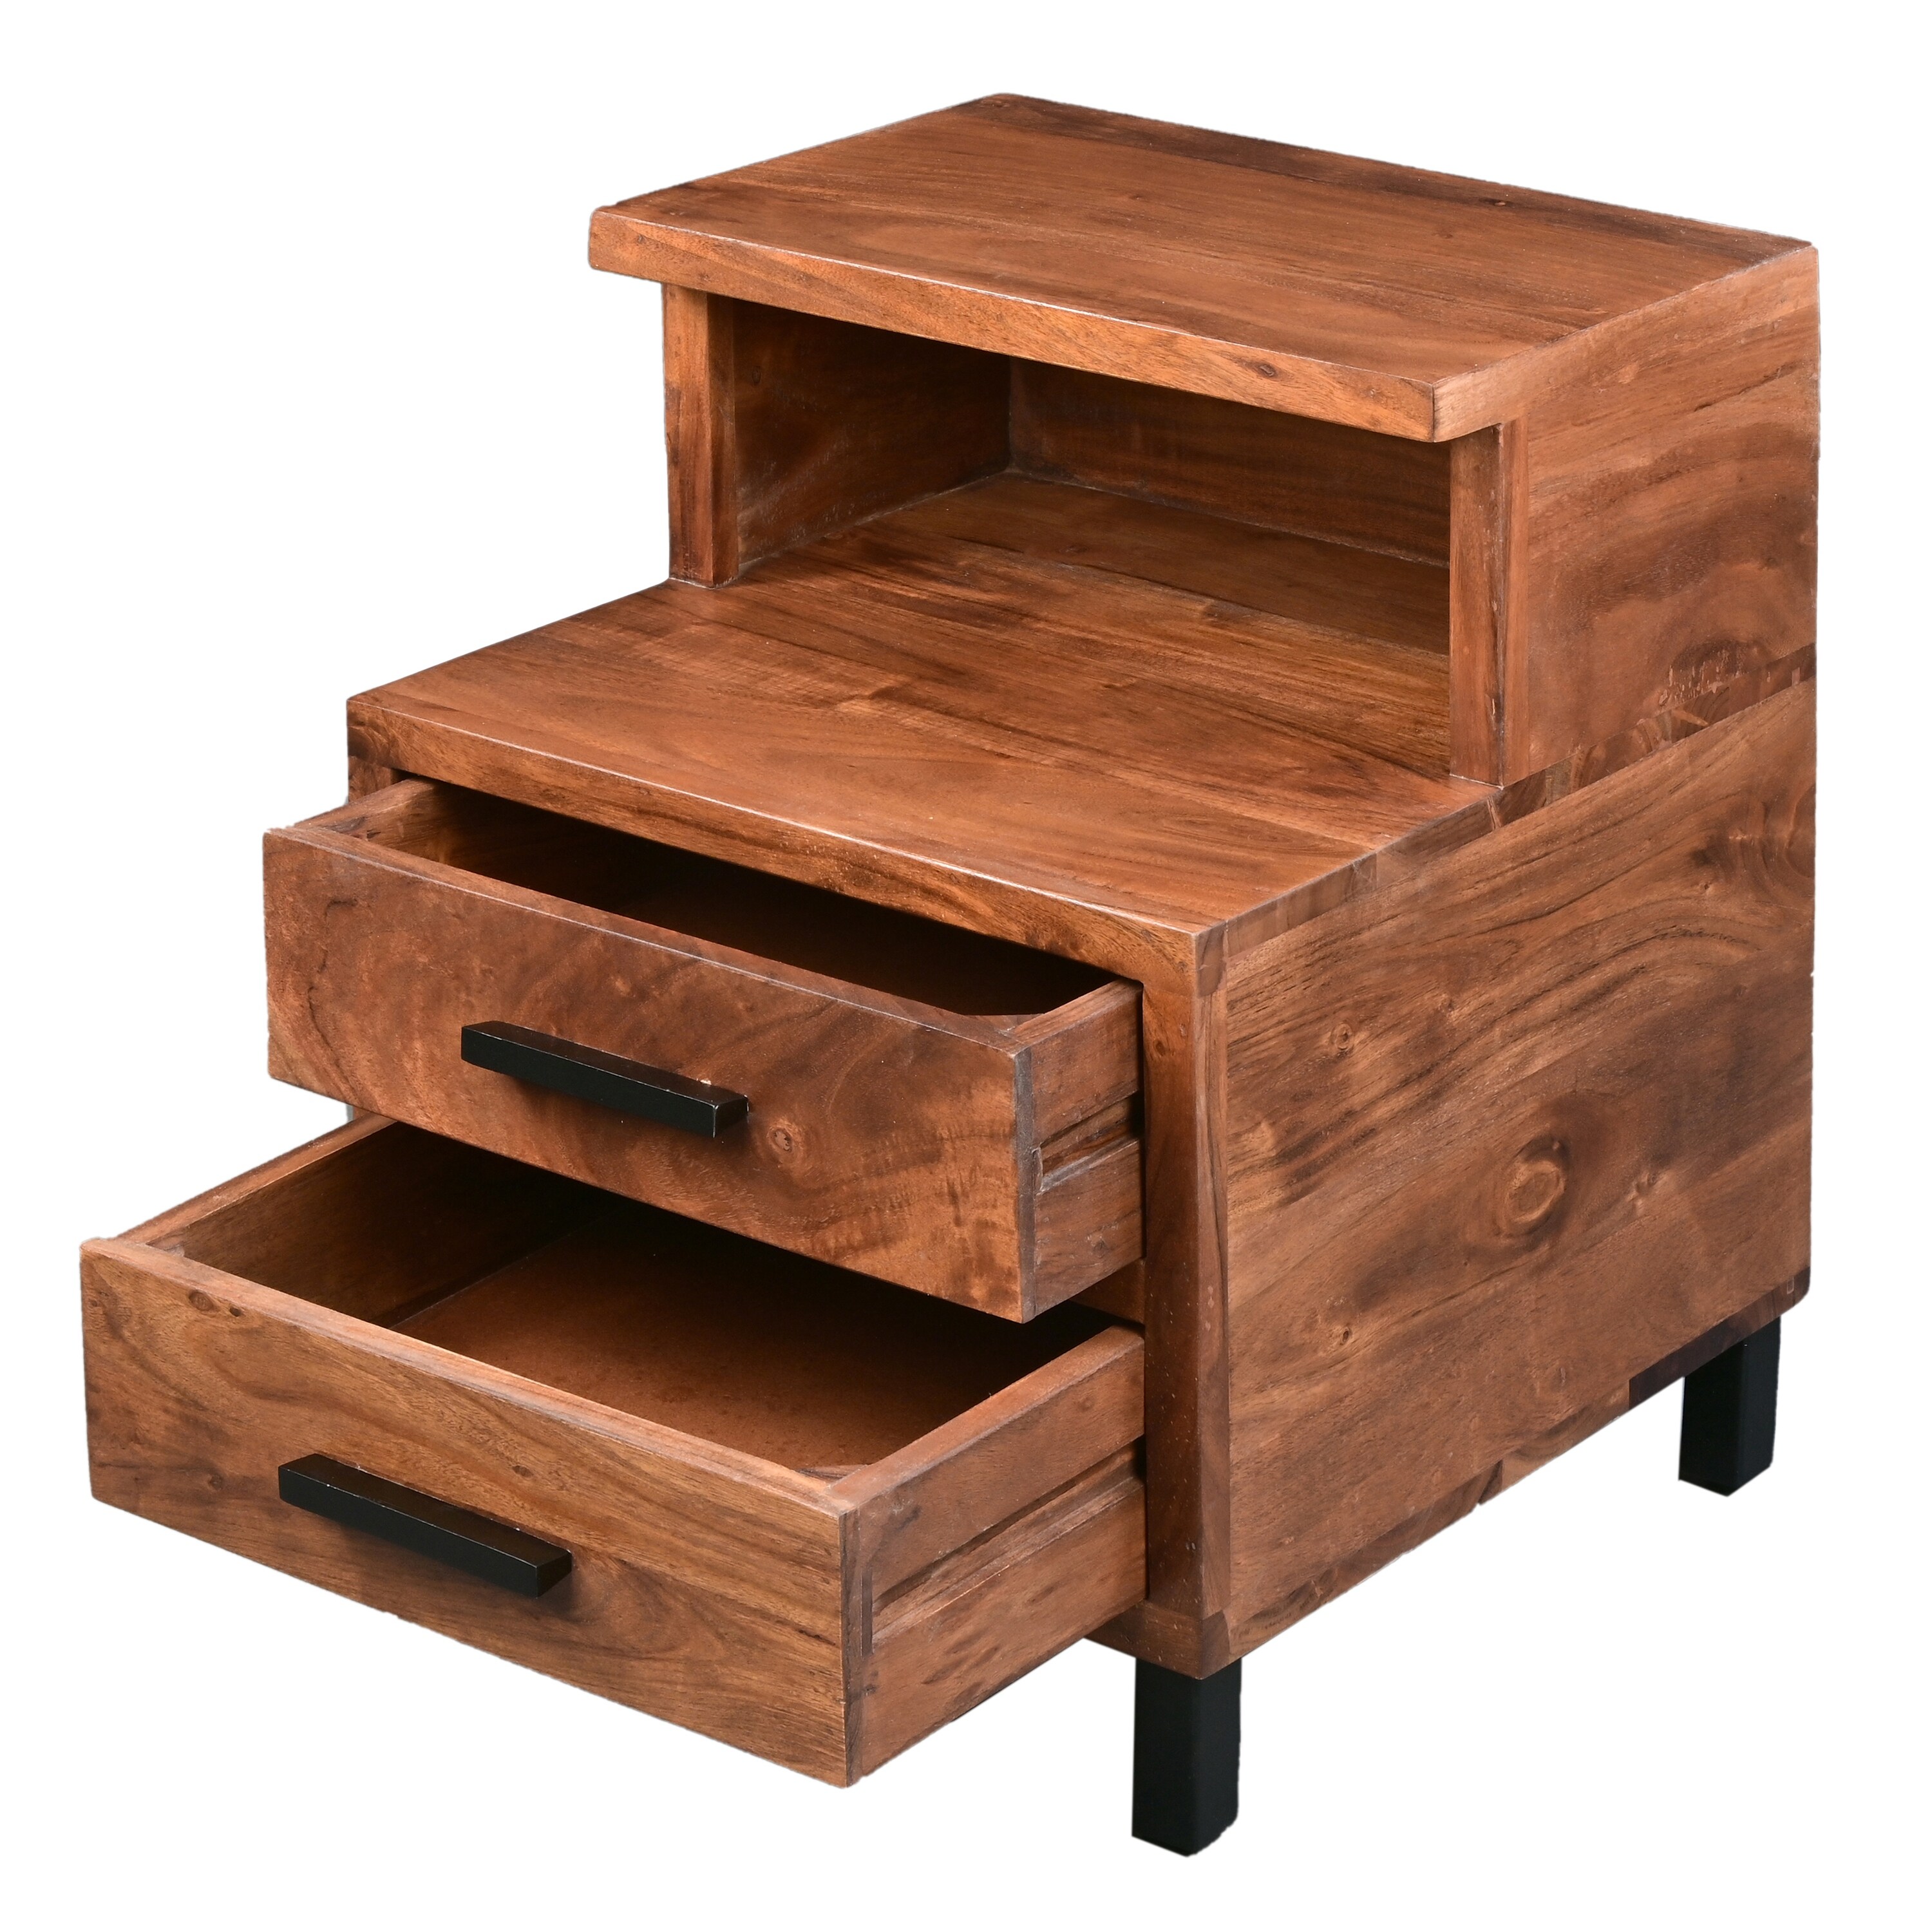 22 Inch Acacia Wood Nightstand, Bedside Table with 2 Drawers and Open Cubby, Walnut Brown - image 5 of 5